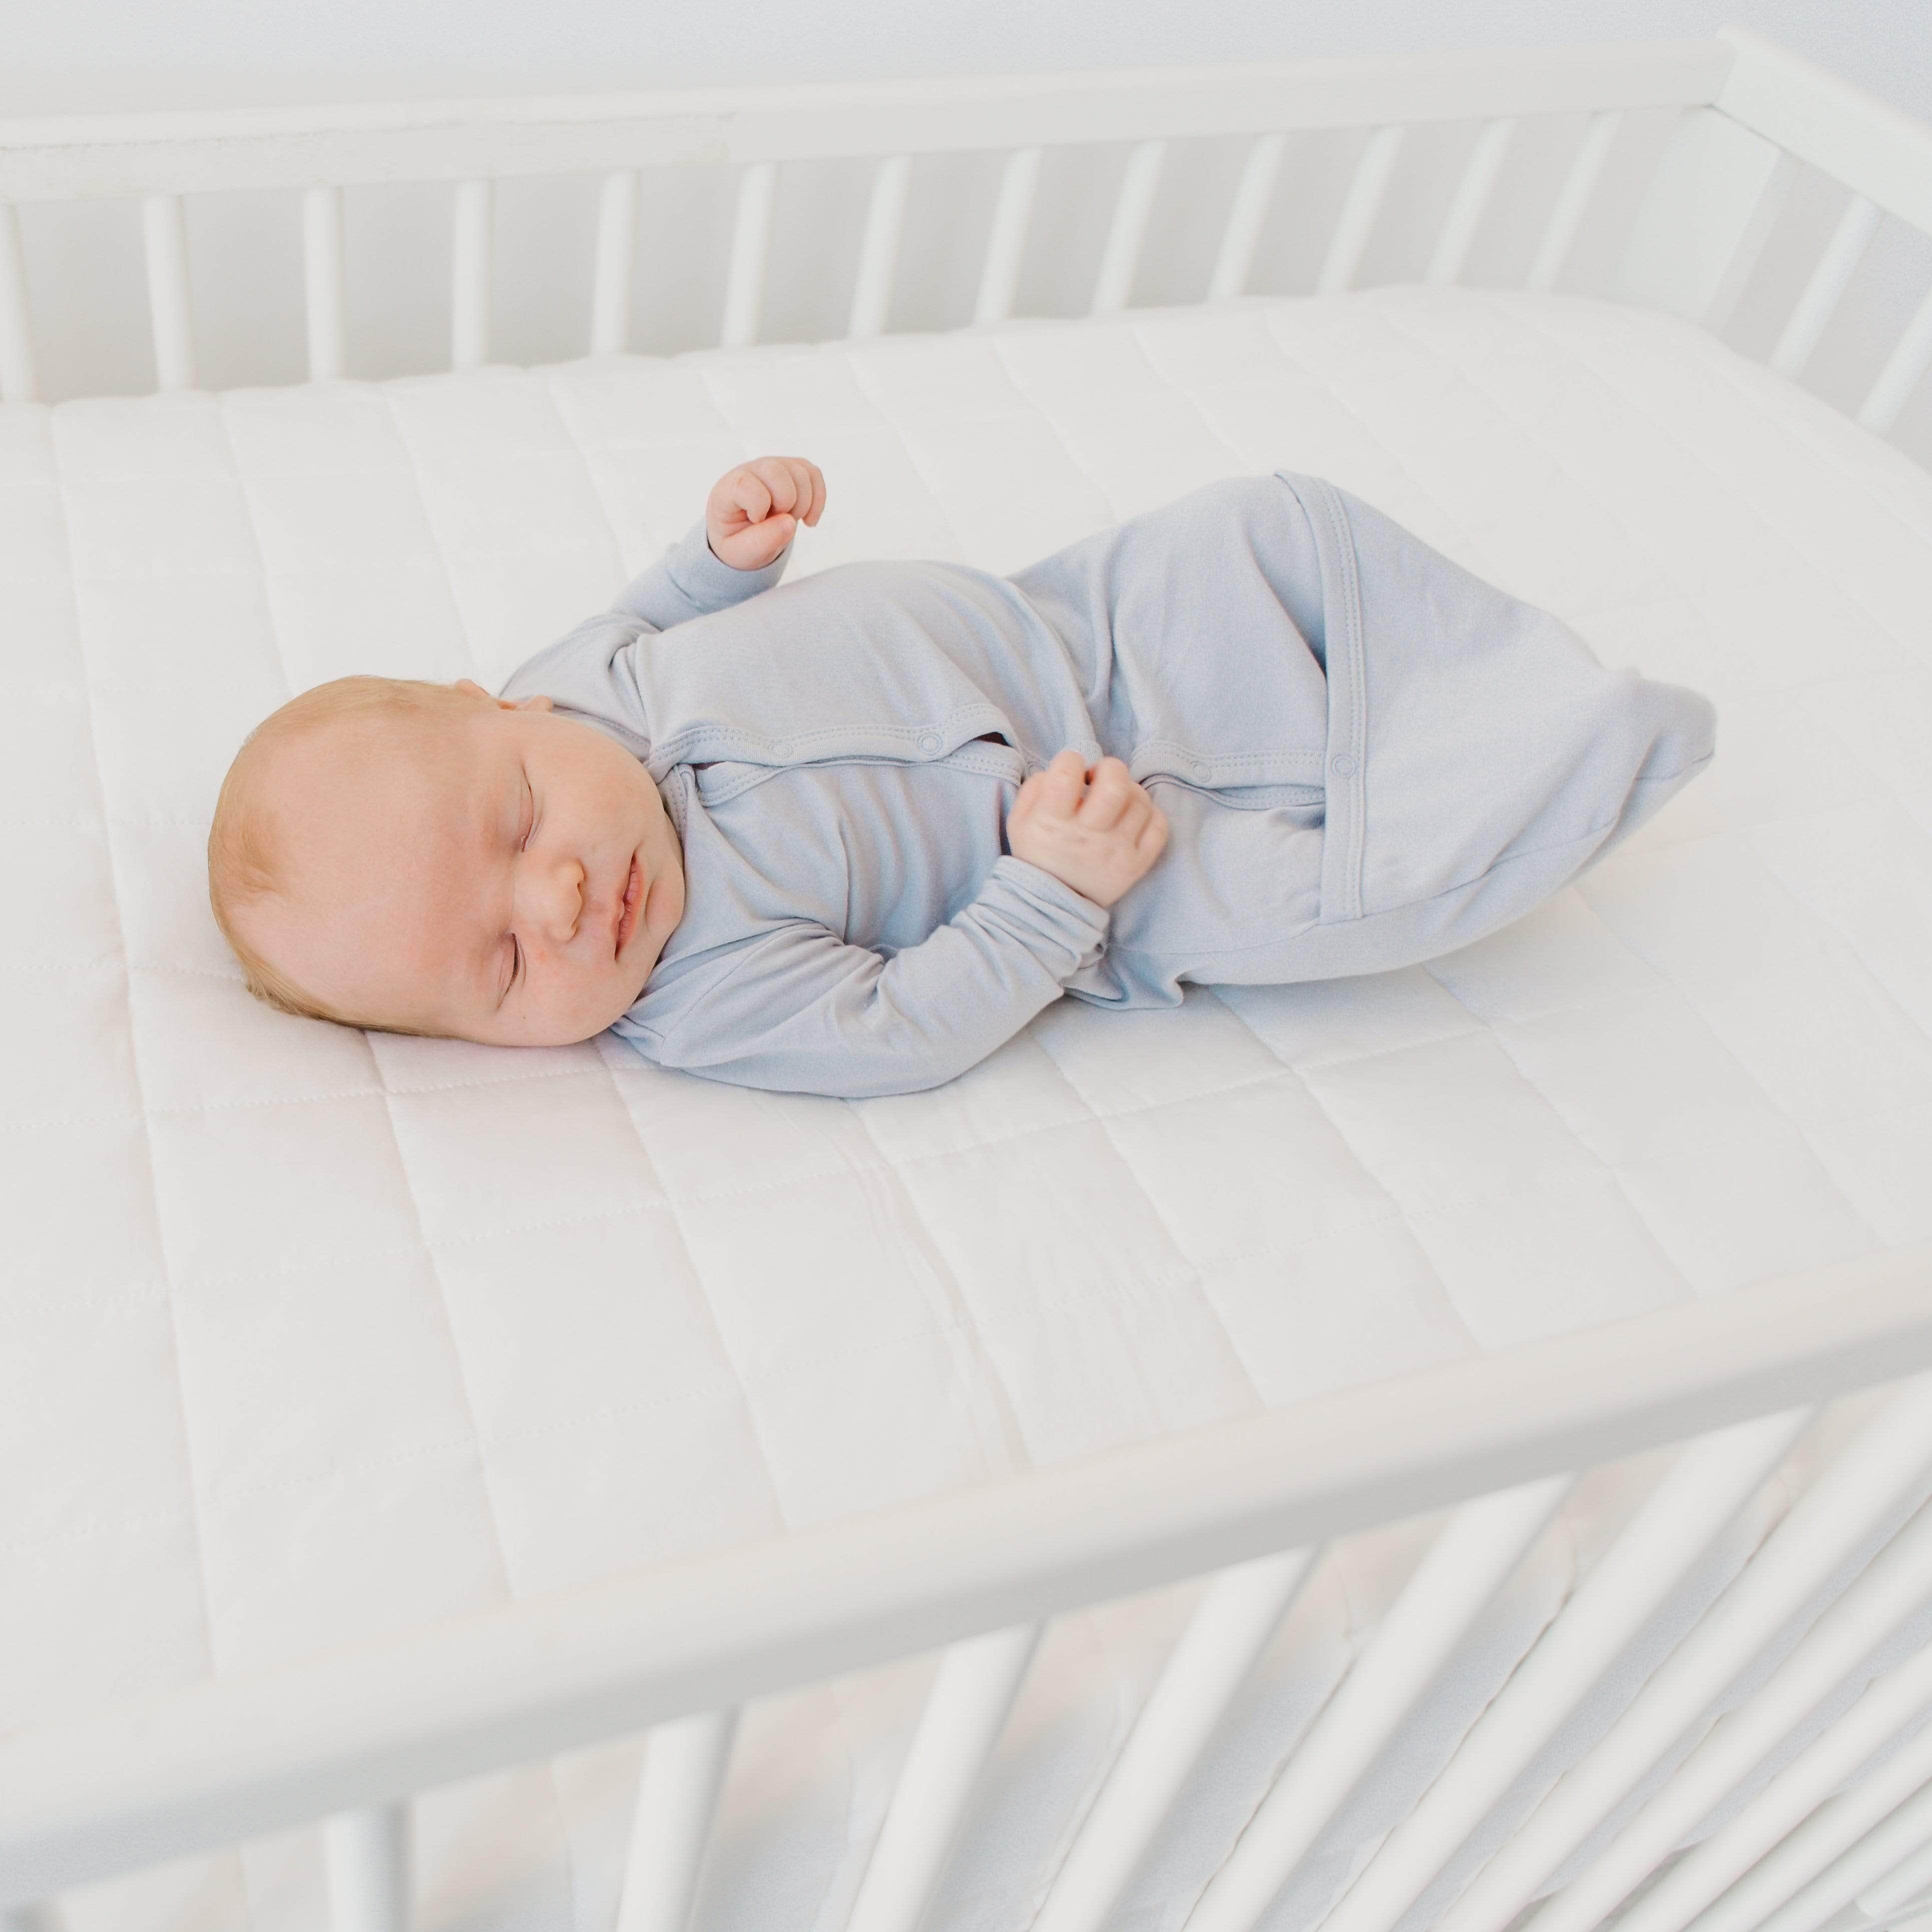 Baby Naps: How Long and Often